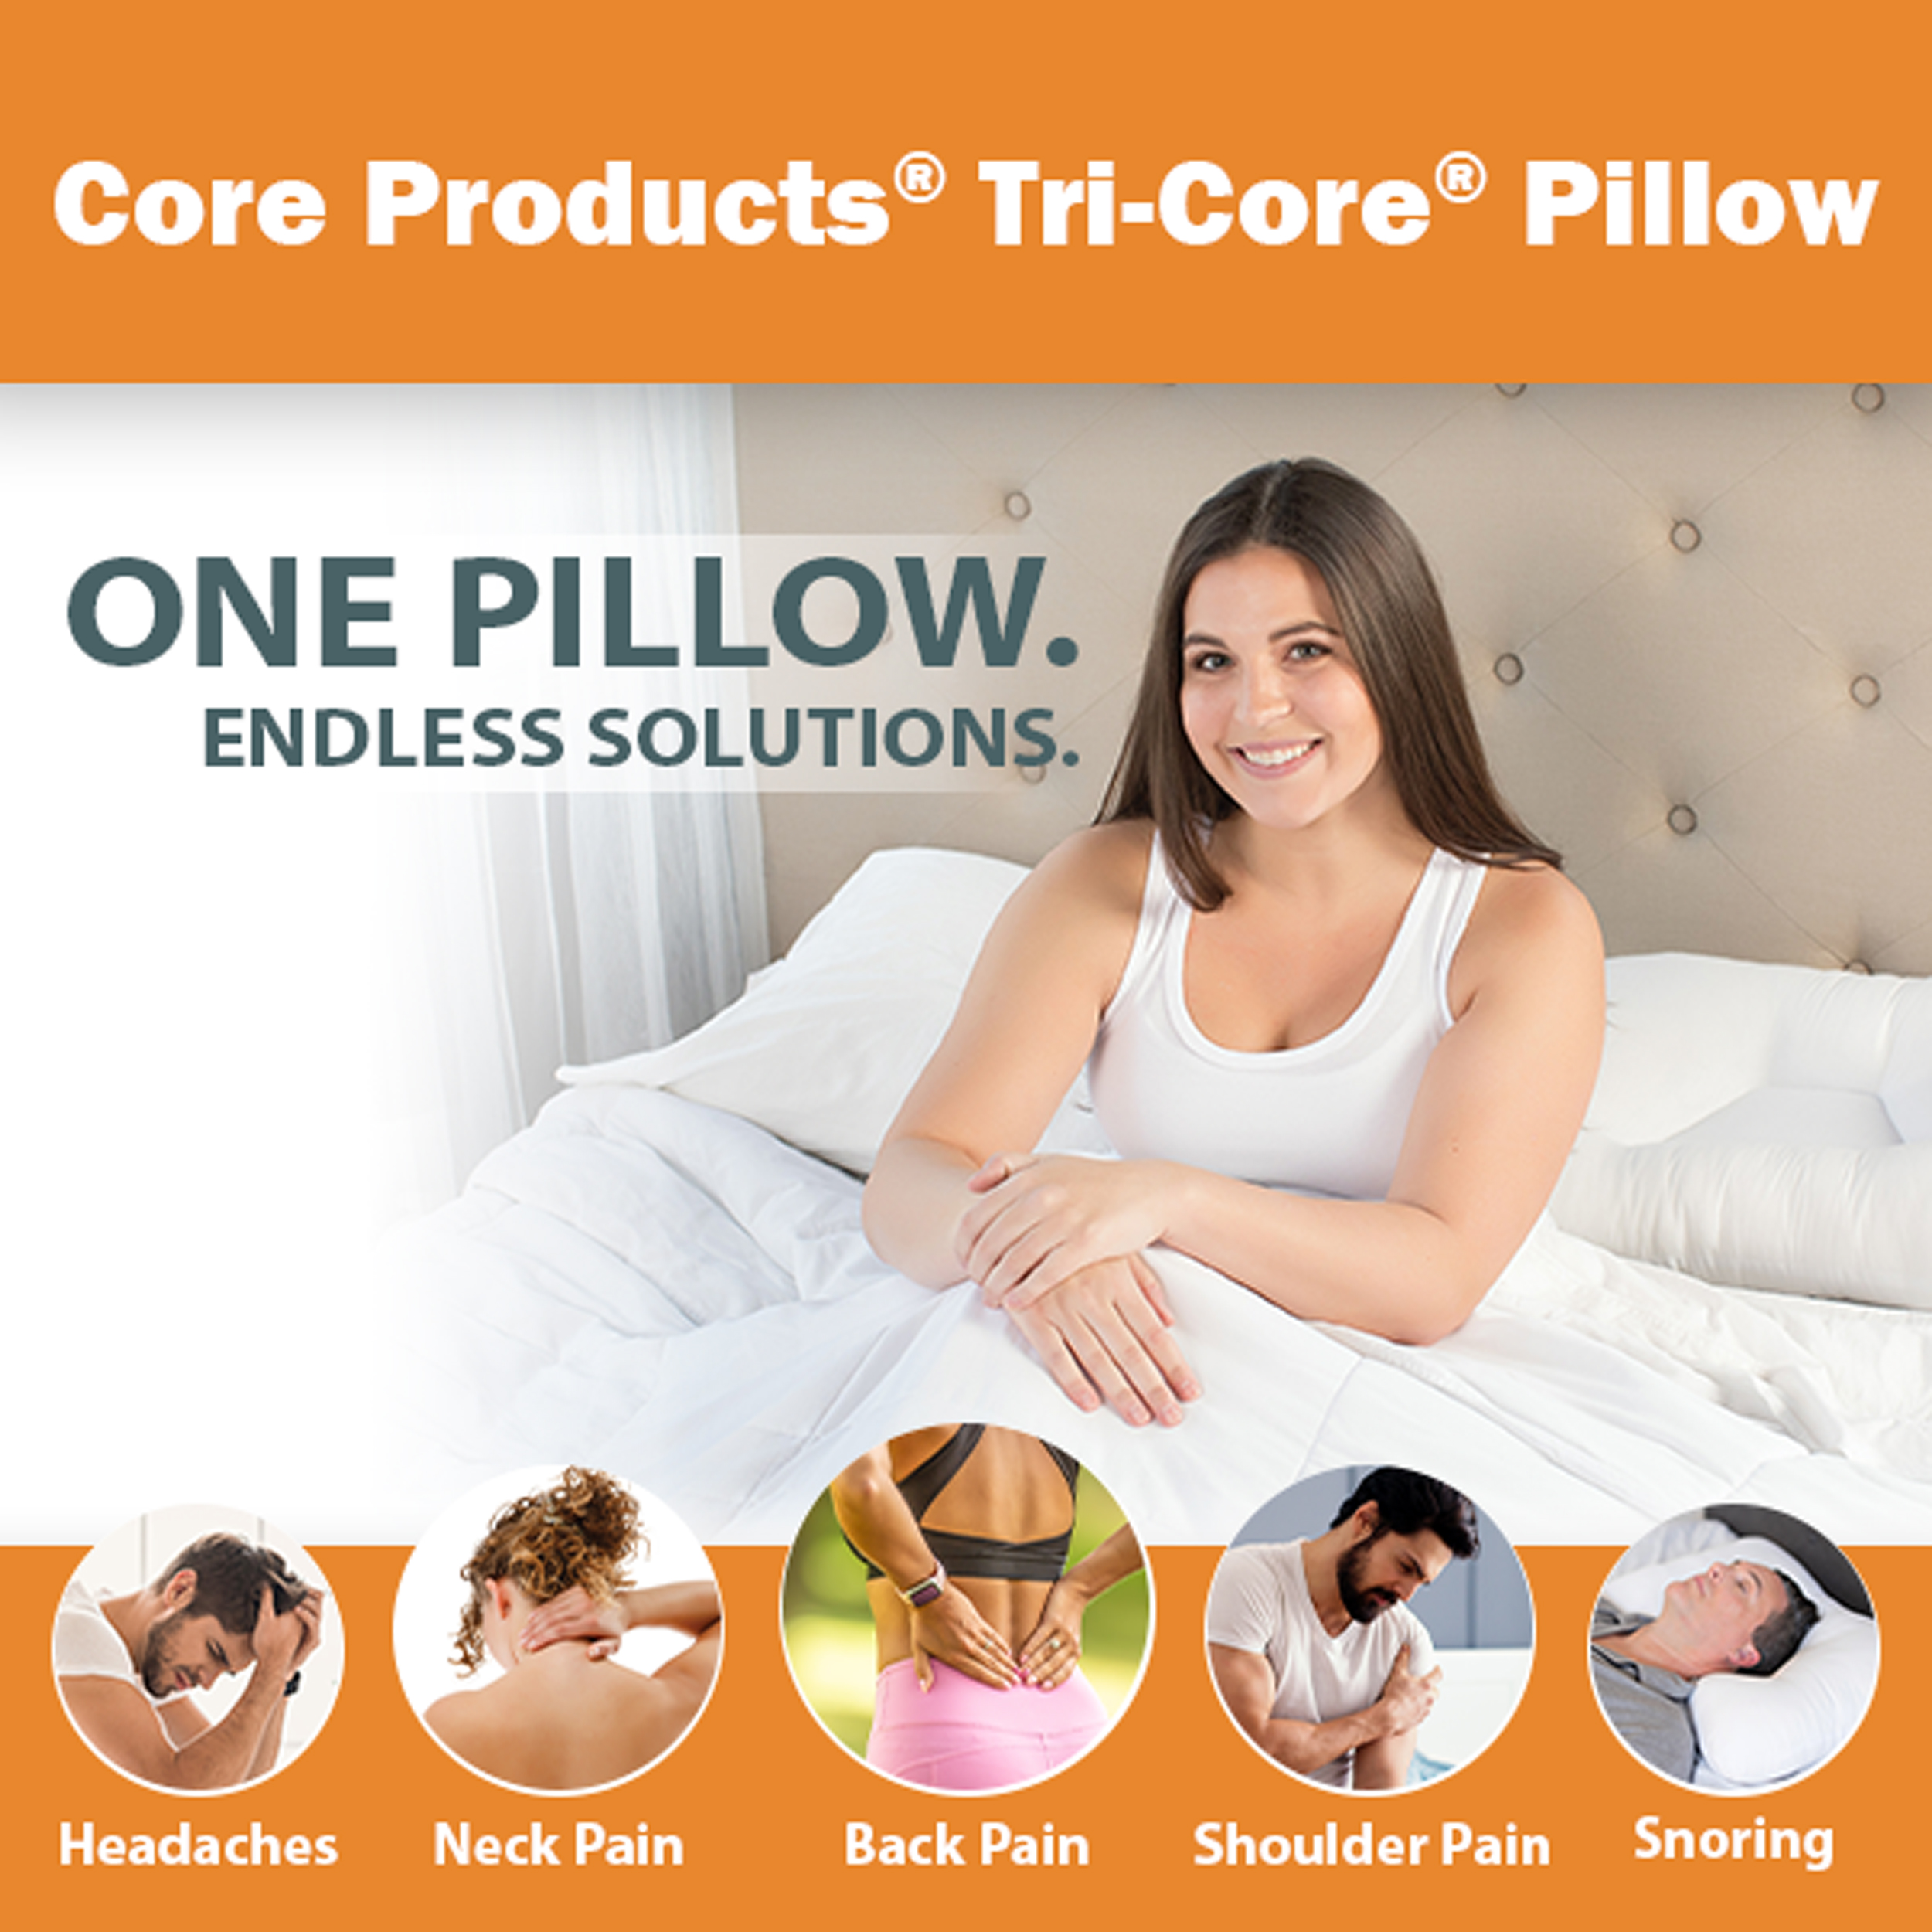 Core Products Tri-Core Cervical Support Pillow for Neck, Shoulder, and Back Pain Relief; Ergonomic Orthopedic Contour Bed Pillow for Back and Side Sleepers; Assembled in USA - Firm, Full Size, 2 Pack - image 2 of 11